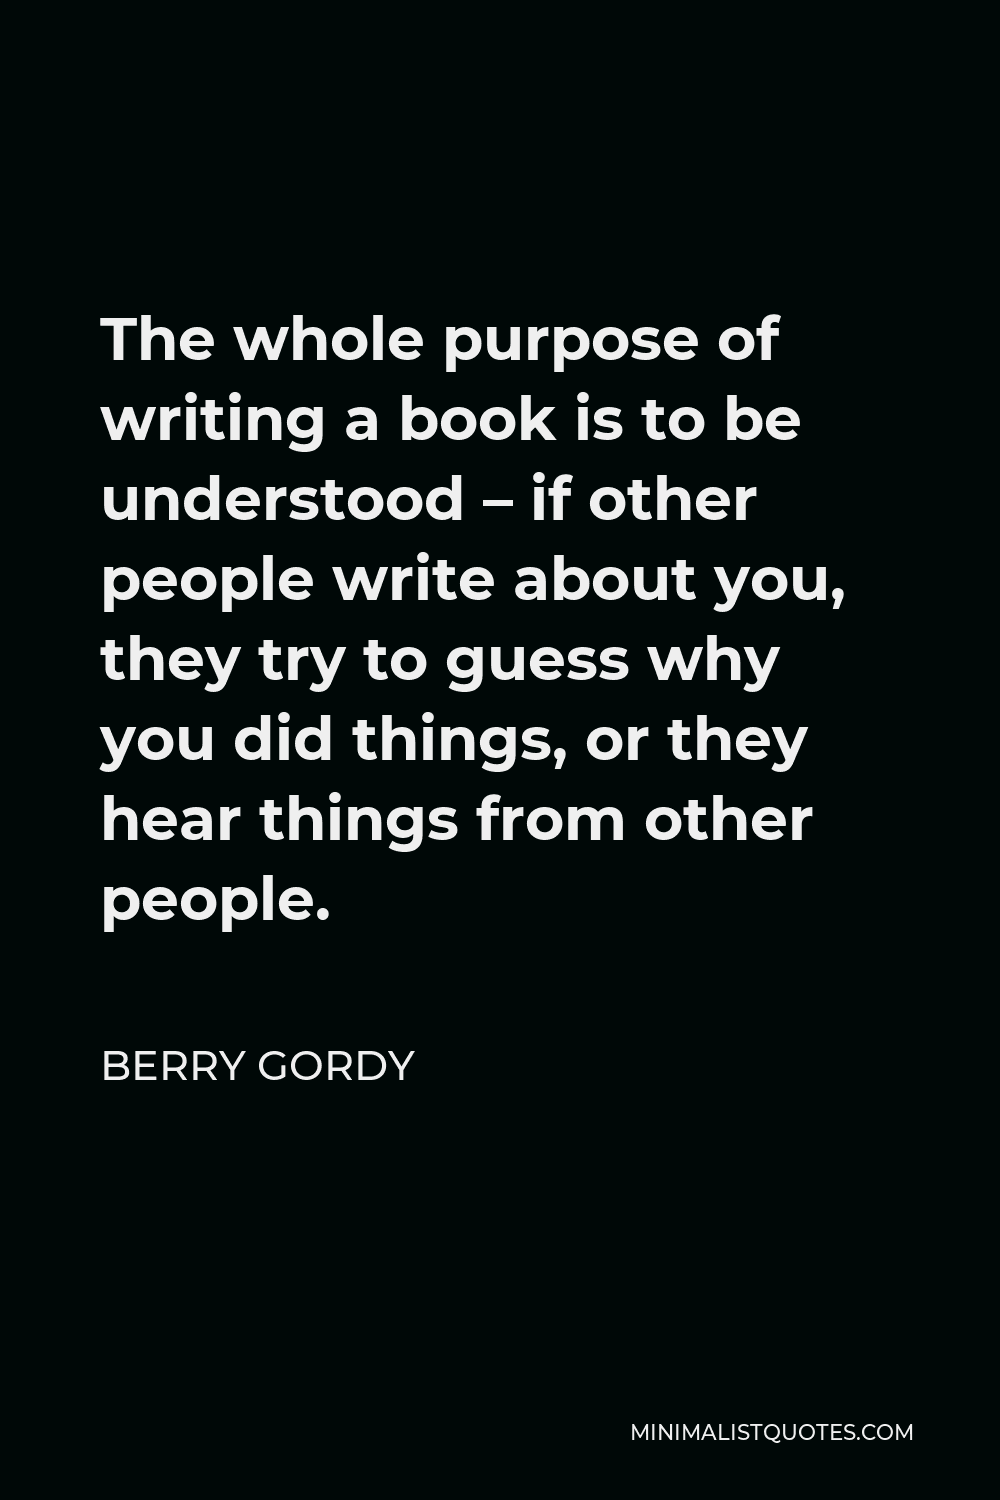 Berry Gordy Quote - The whole purpose of writing a book is to be understood – if other people write about you, they try to guess why you did things, or they hear things from other people.